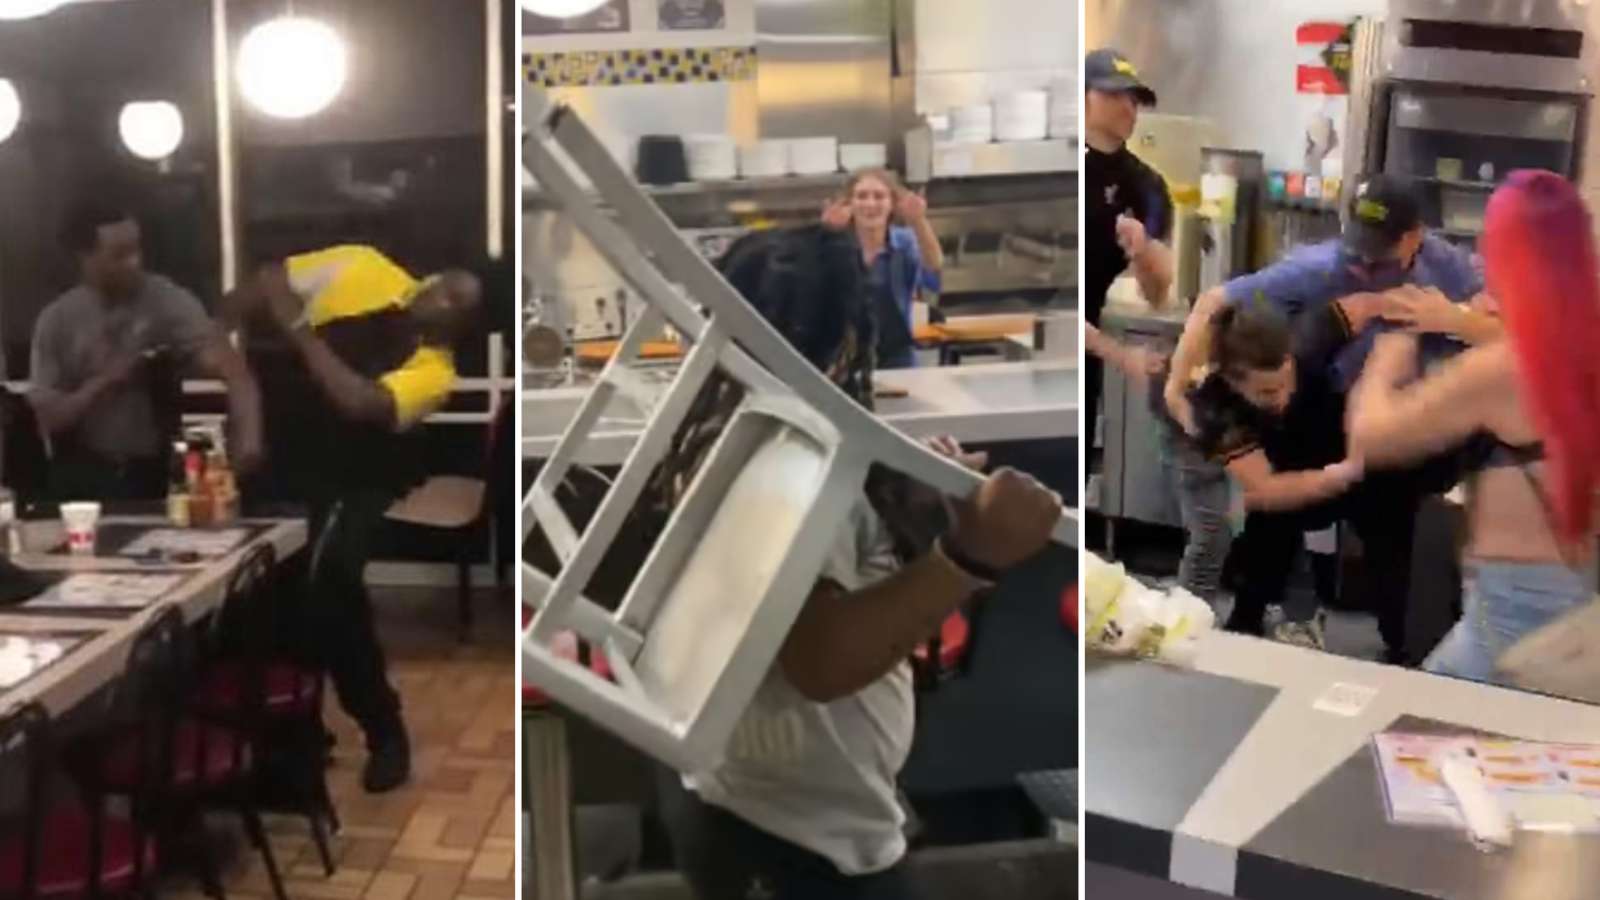 waffle house brawls with chairs, knives and fists